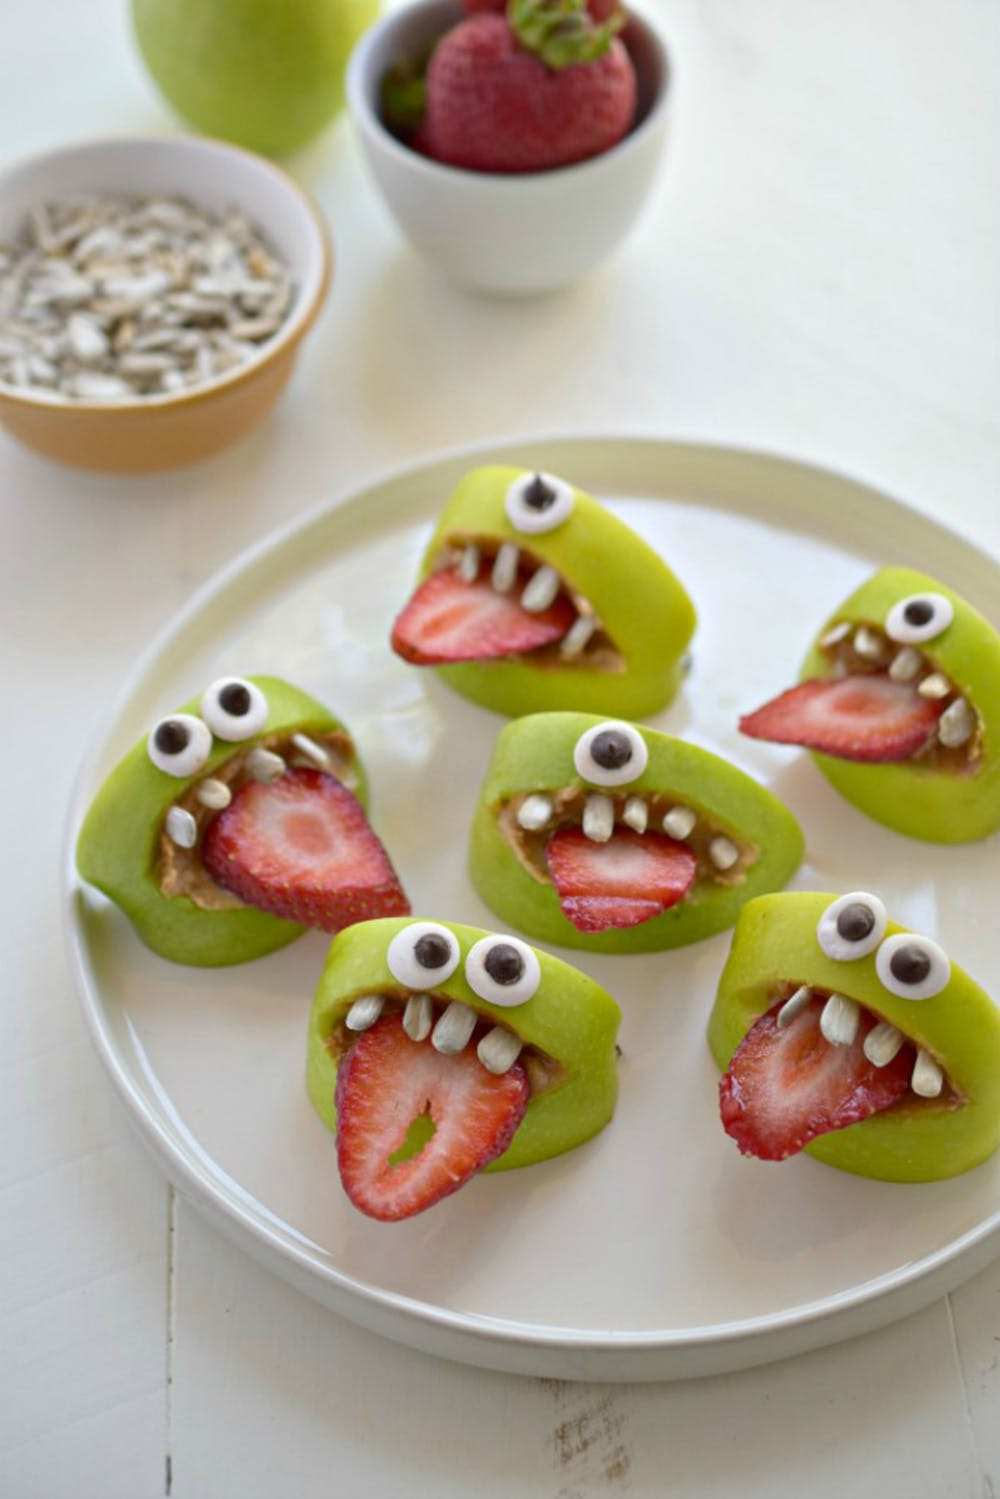 Easy Halloween Party Food Ideas For Adults
 Halloween Food Ideas 2019 With Download Daily SMS